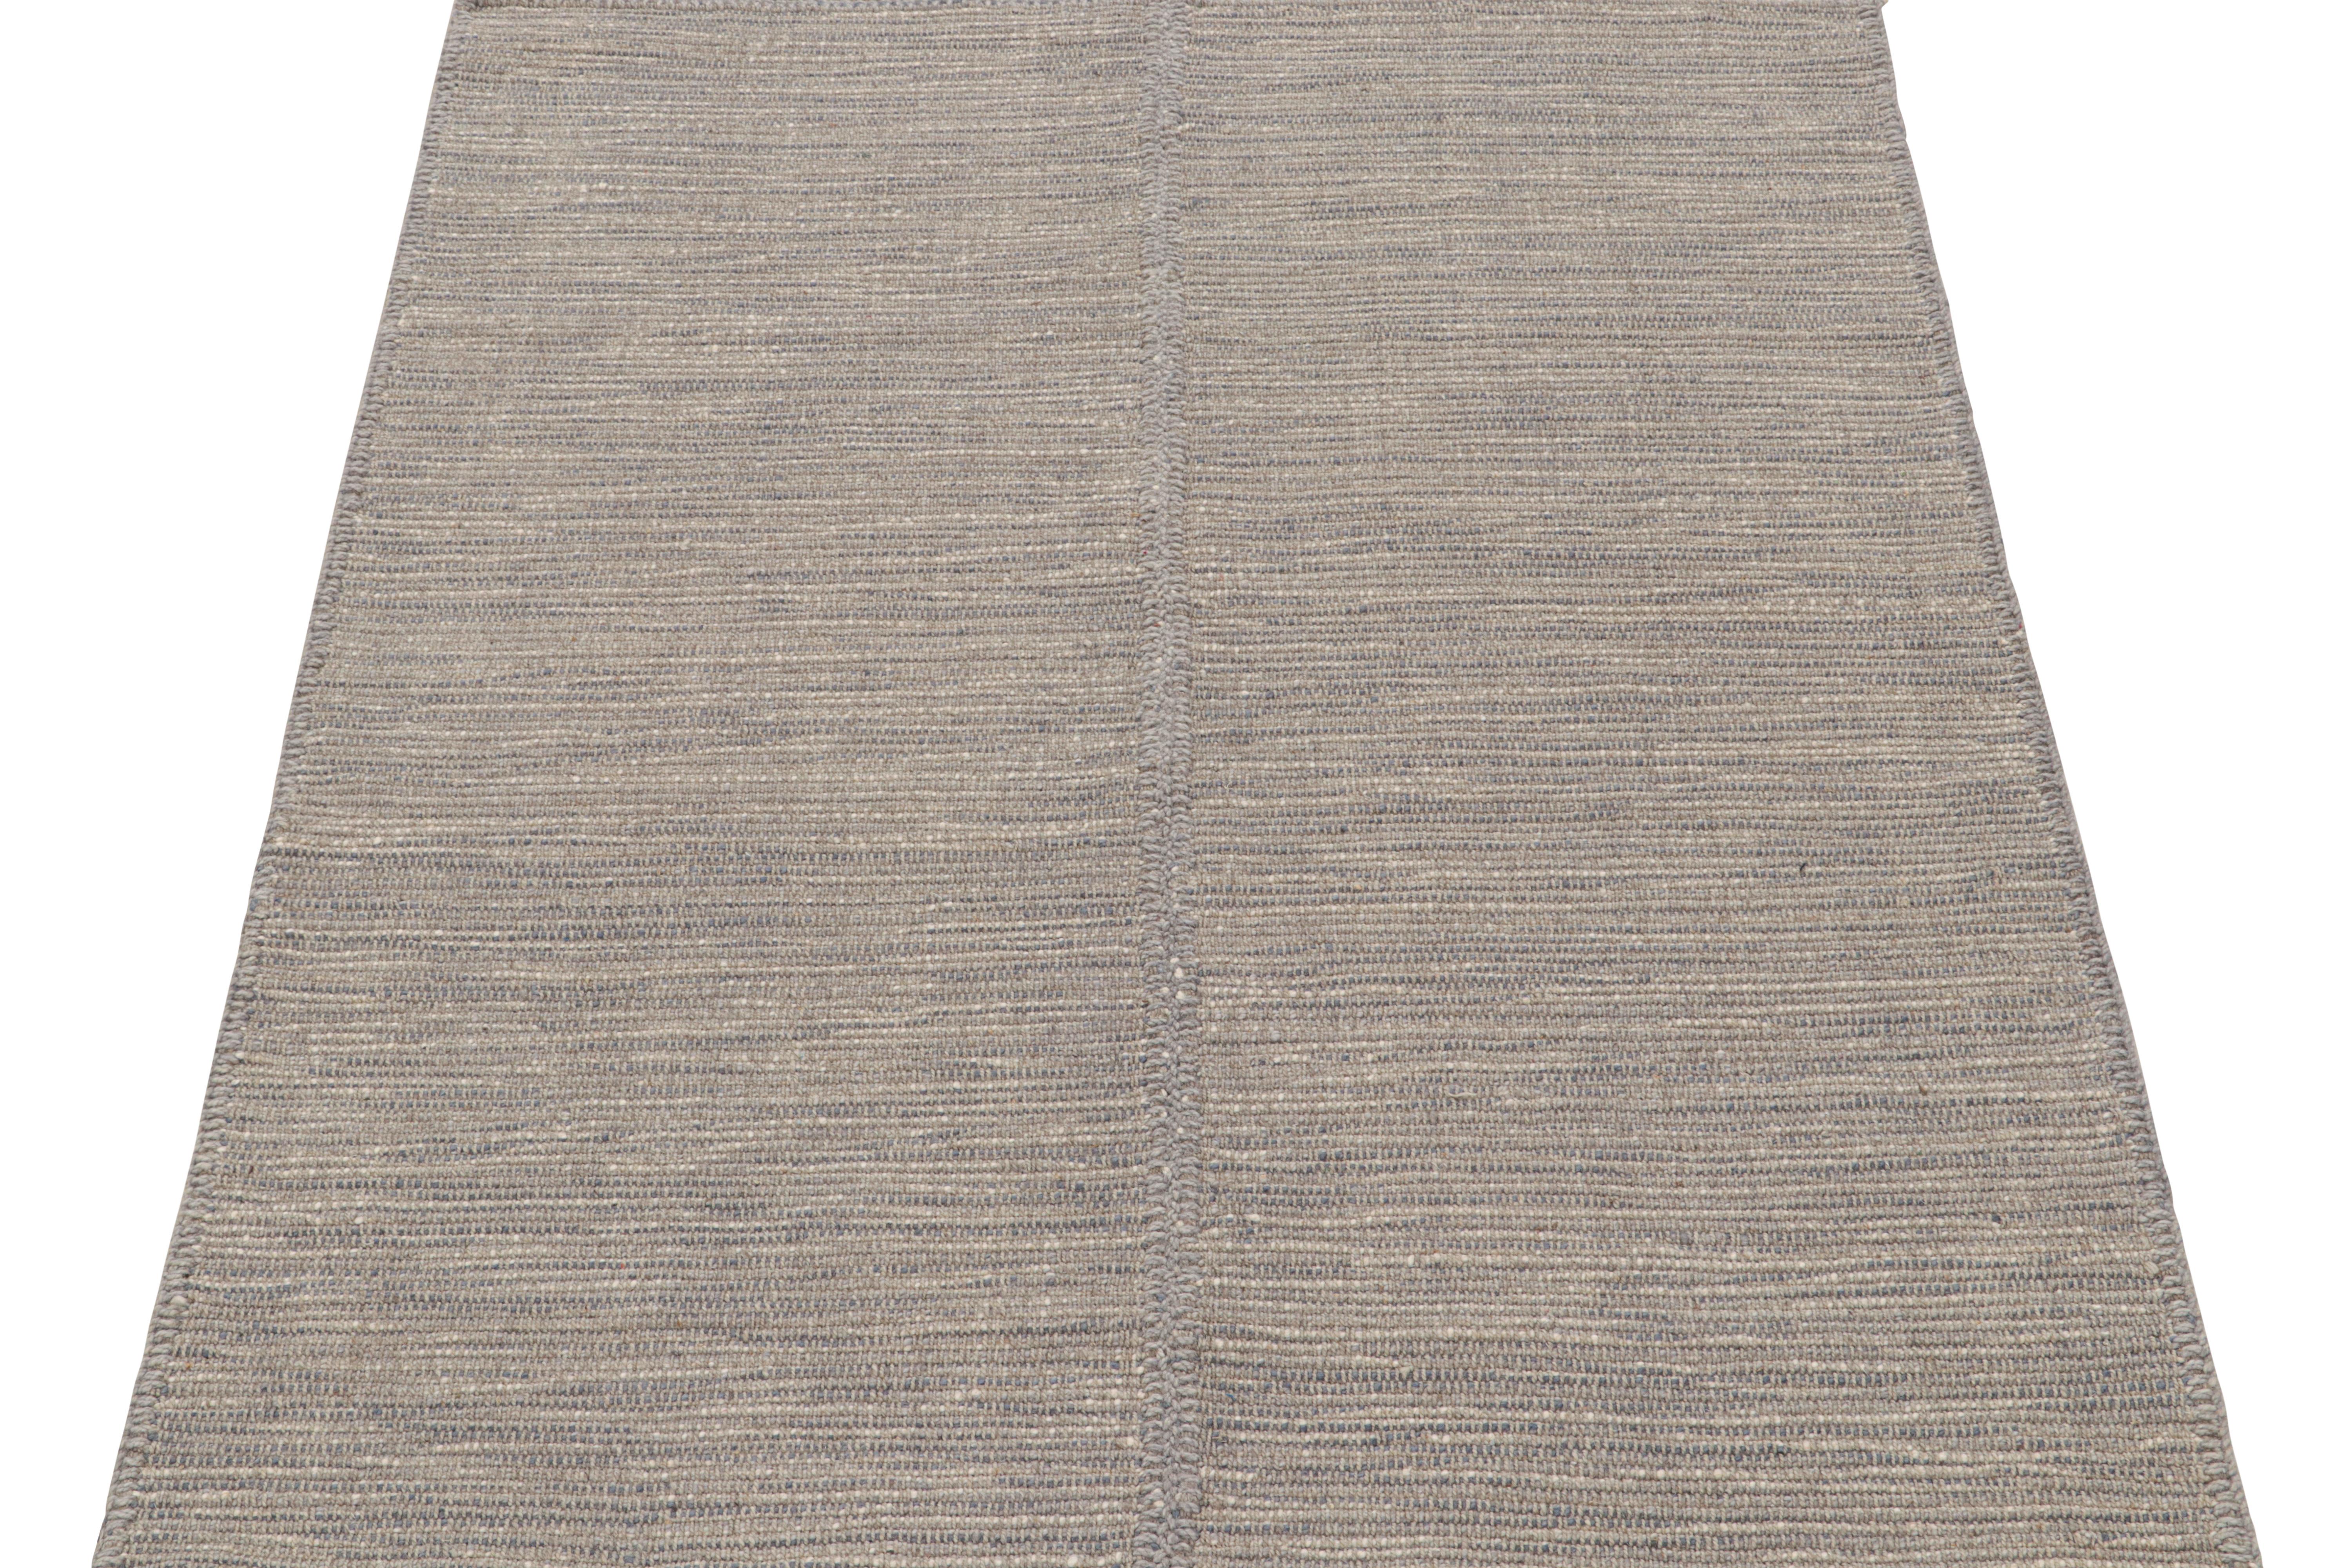 Handwoven in wool, this 4x5 Kilim is from a bold new line of contemporary flatweaves by Rug & Kilim.

Further On the Design:

The “Rez Kilim” connotes a modern take on classic panel weaving. This edition enjoys light gray with beige and blue